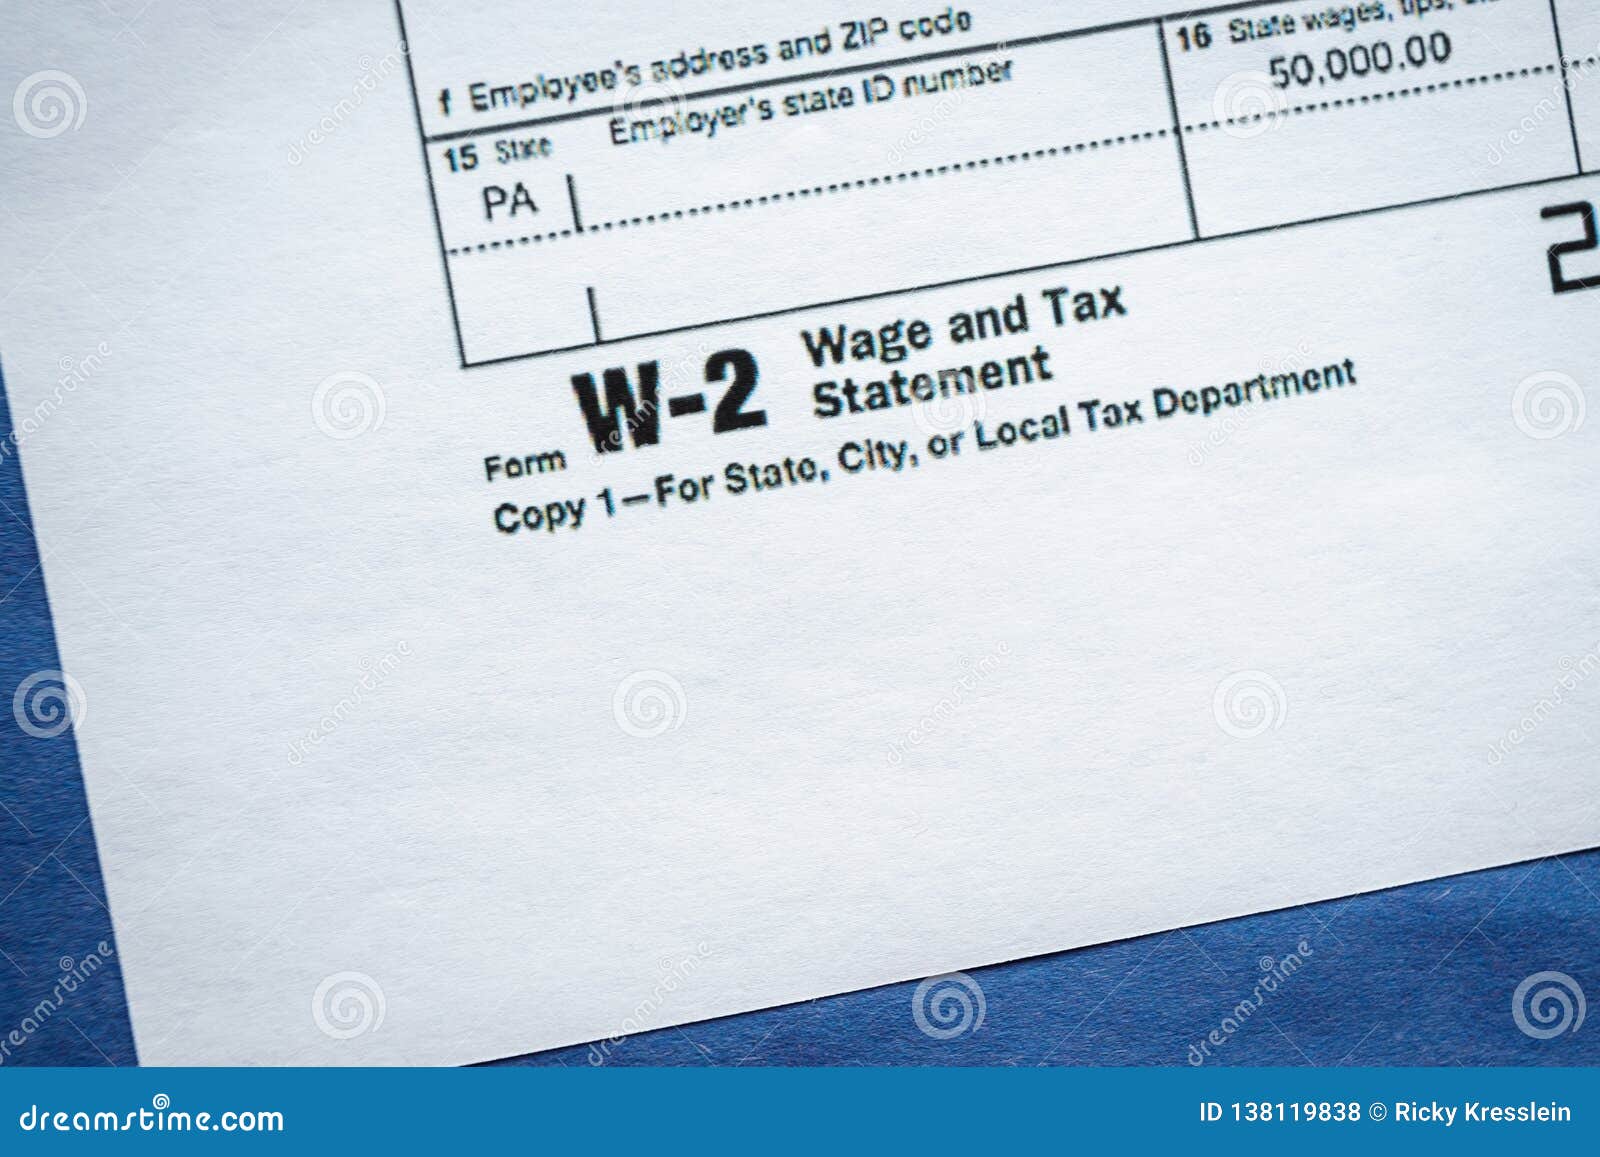 form-w-2-wage-and-tax-statement-editorial-stock-photo-image-of